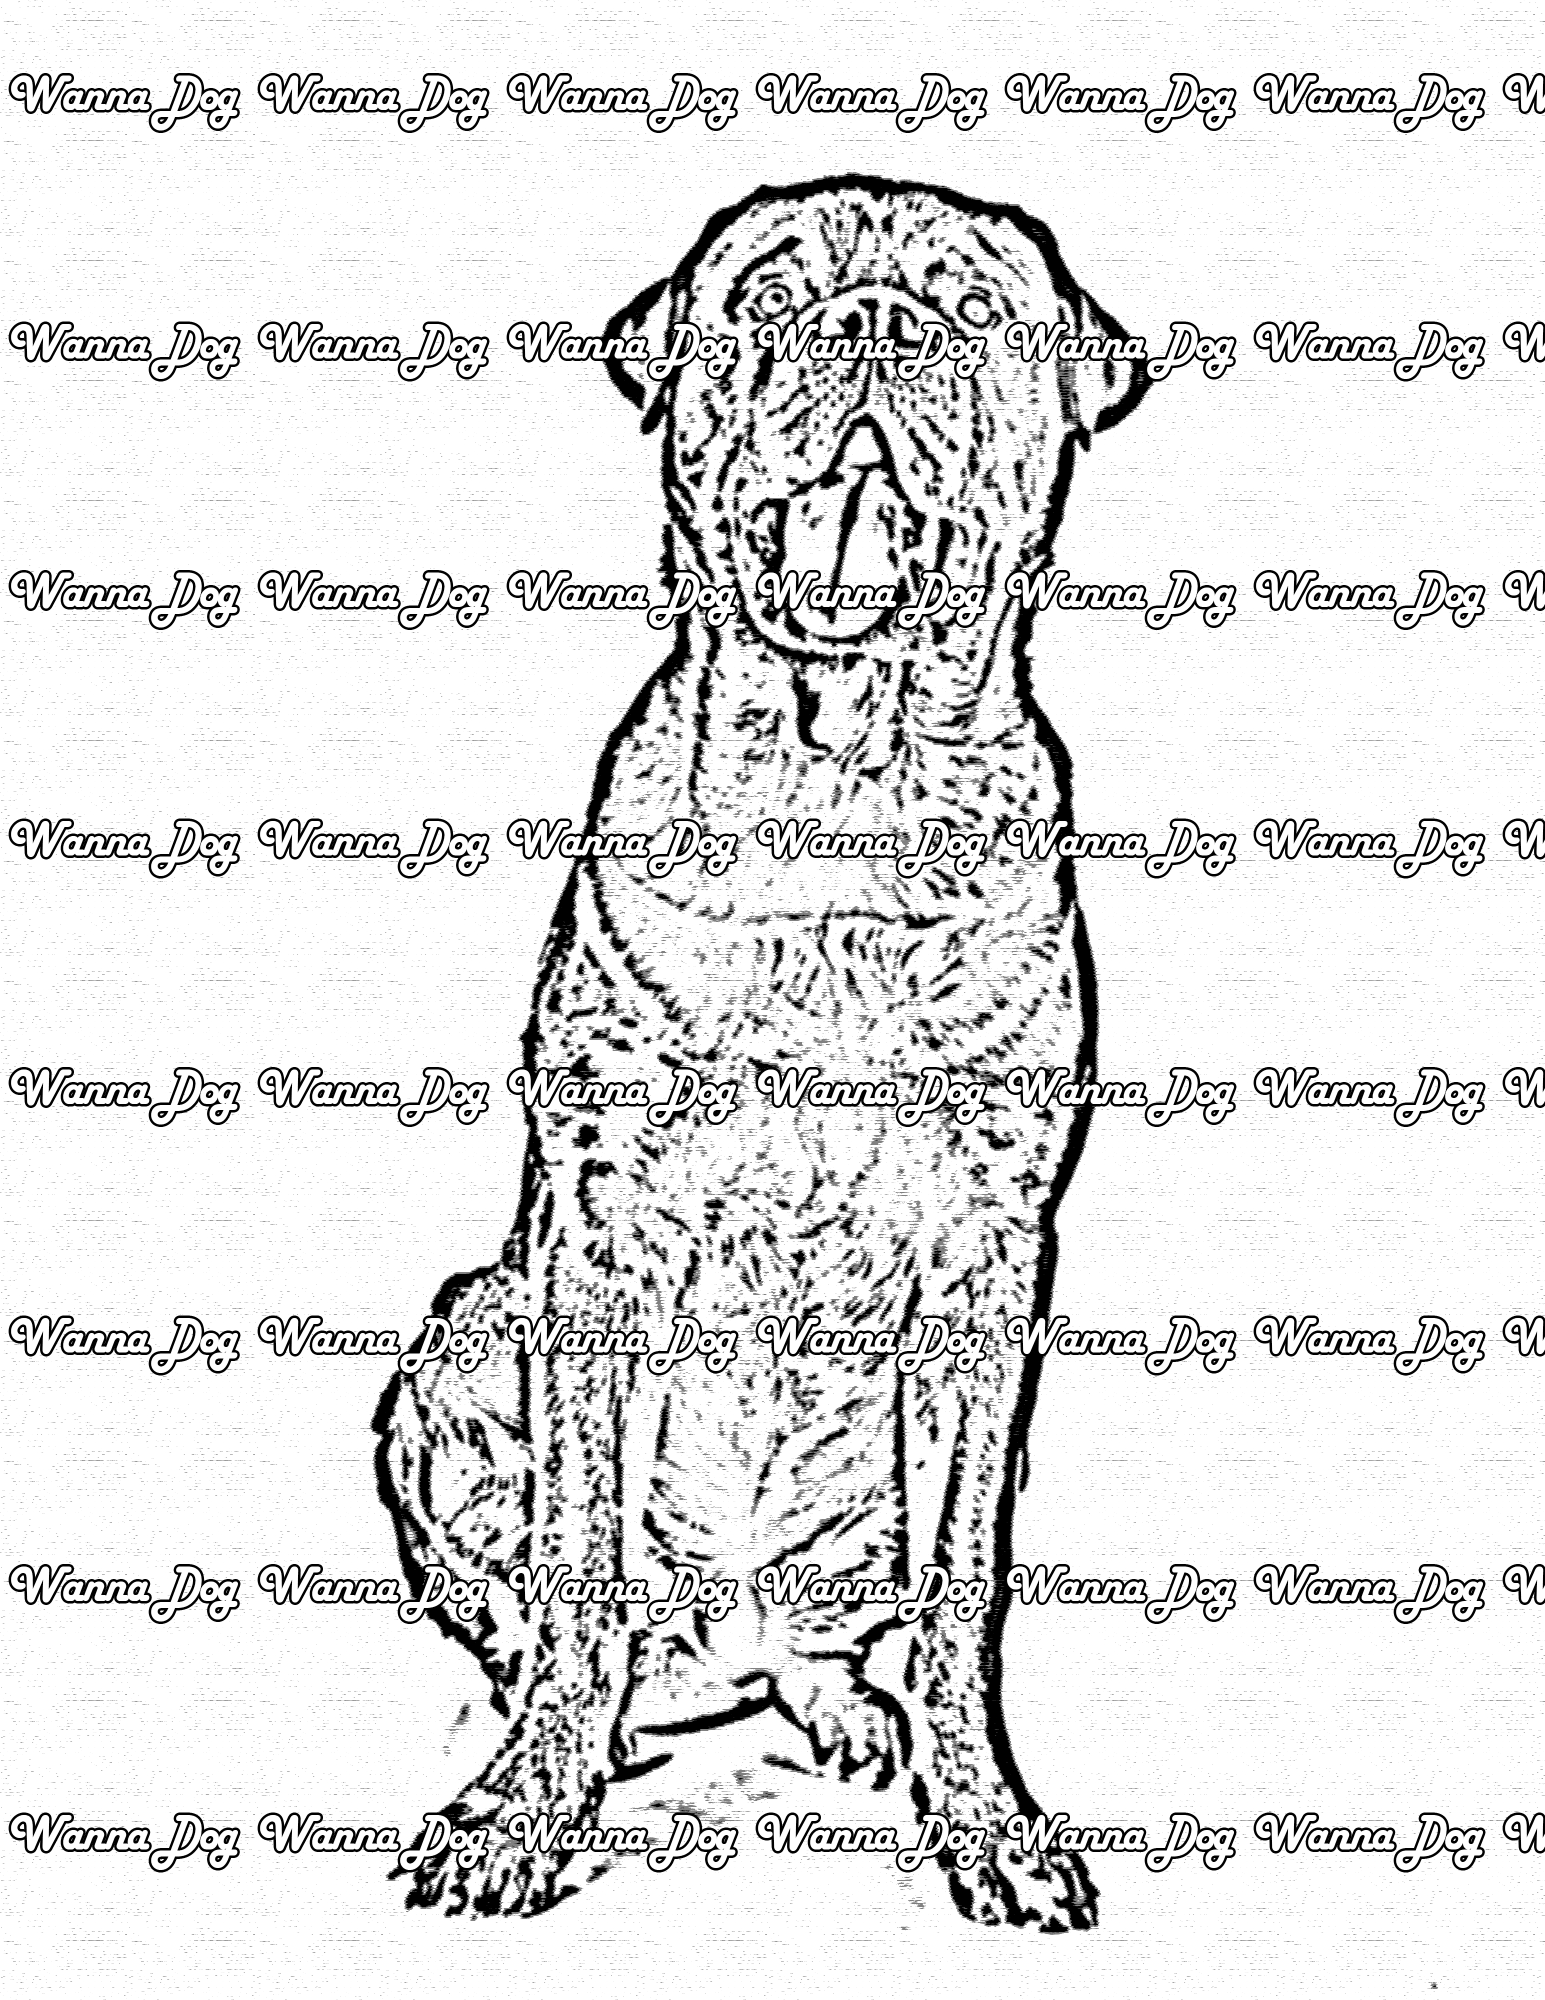 Rottweiler Coloring Page of a Rottweiler with their tongue out and posing